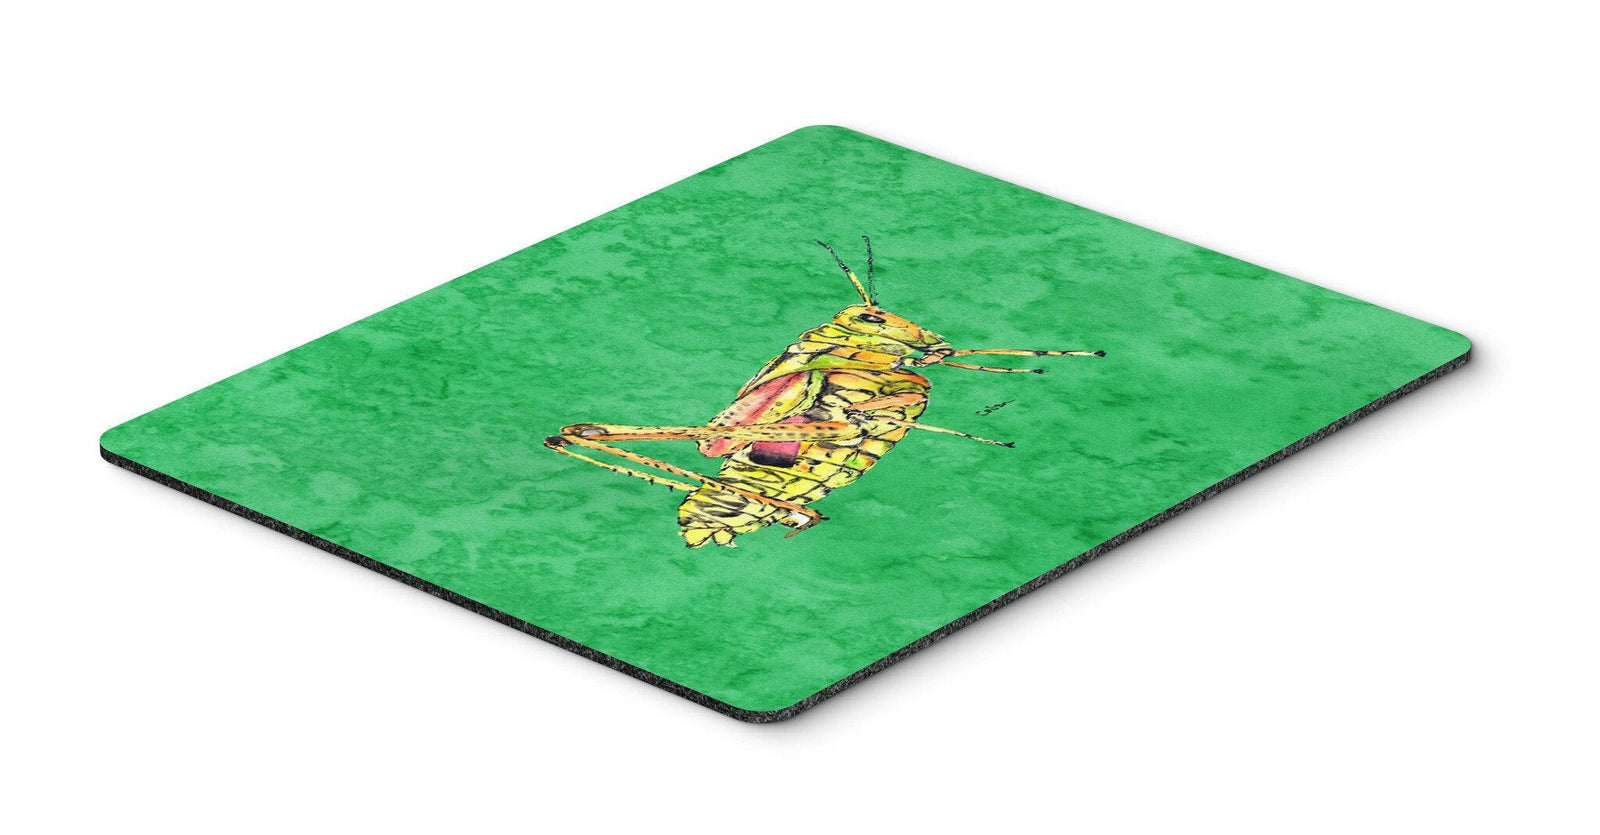 Grasshopper on Green Mouse Pad, Hot Pad or Trivet by Caroline's Treasures